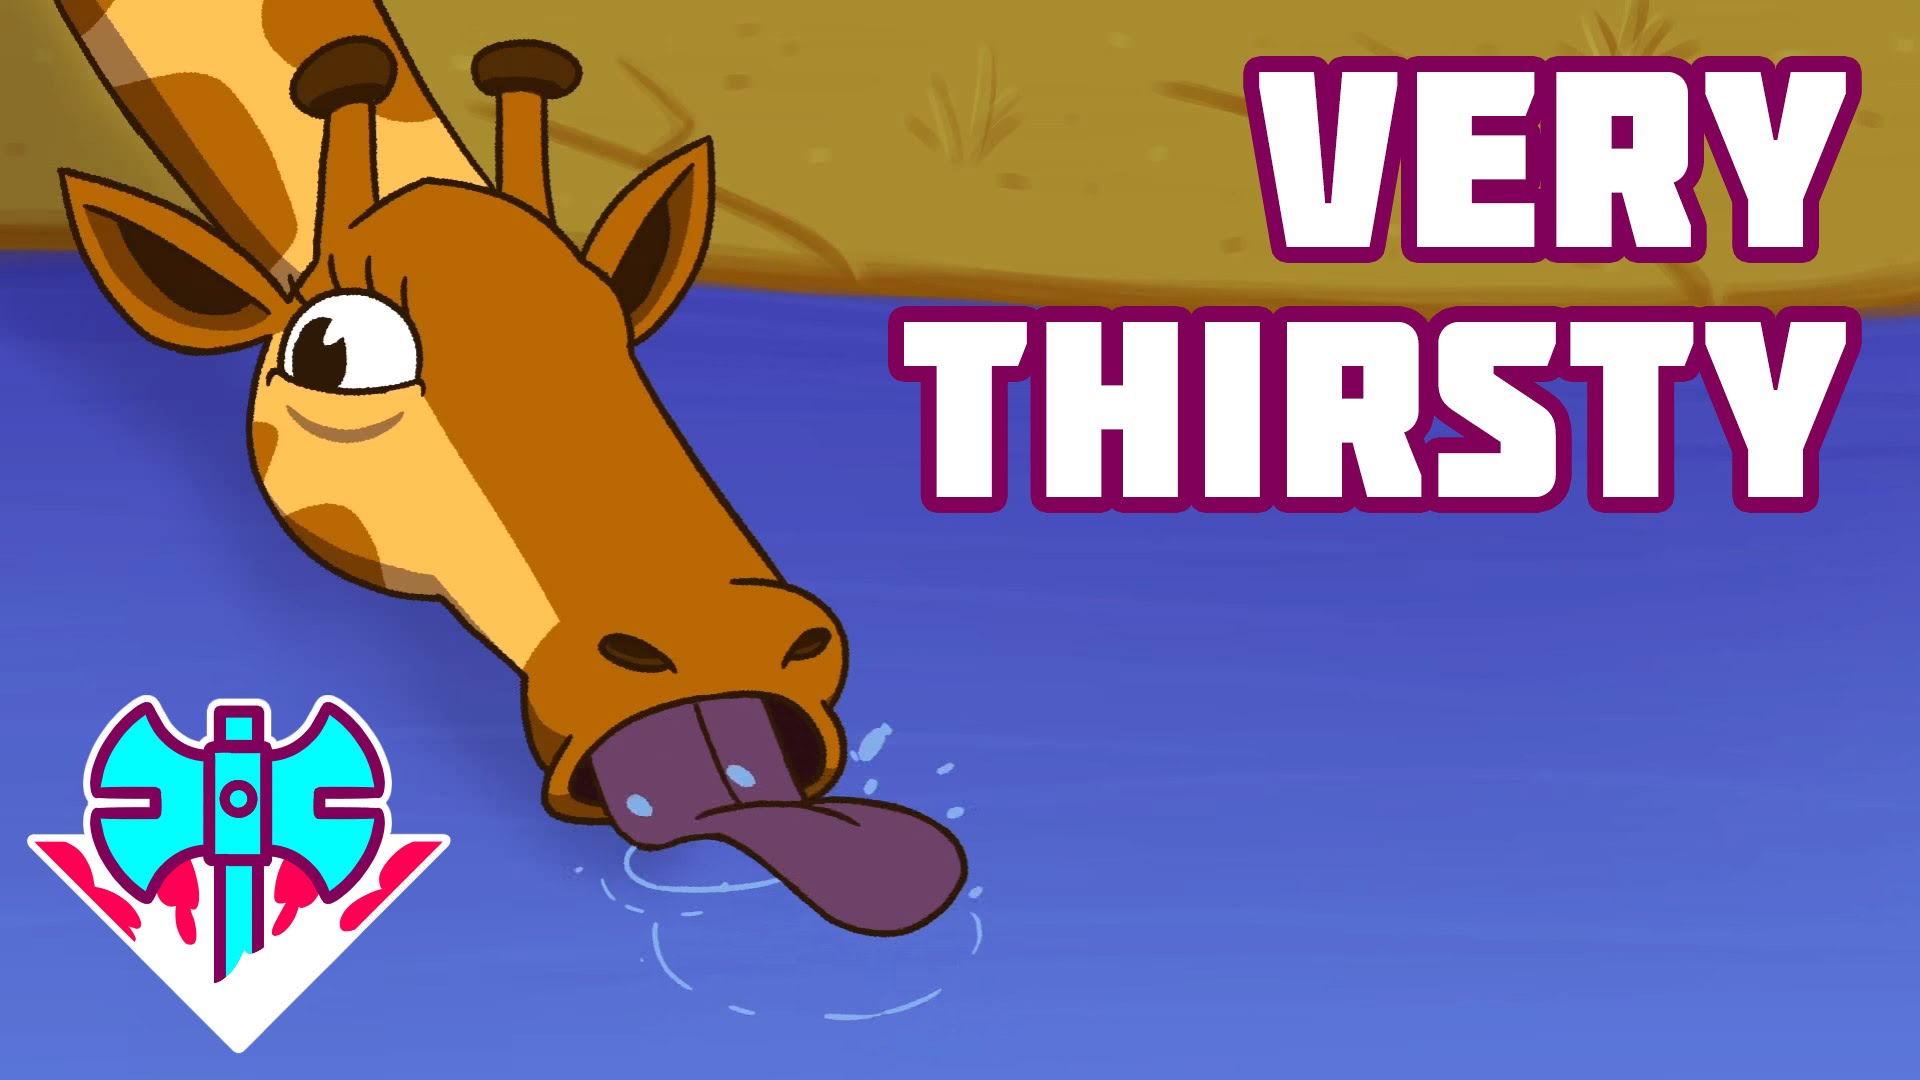 The camel was very thirsty. Thirsty. Very thirsty. Nick thirsty. Hot animals thirsty.